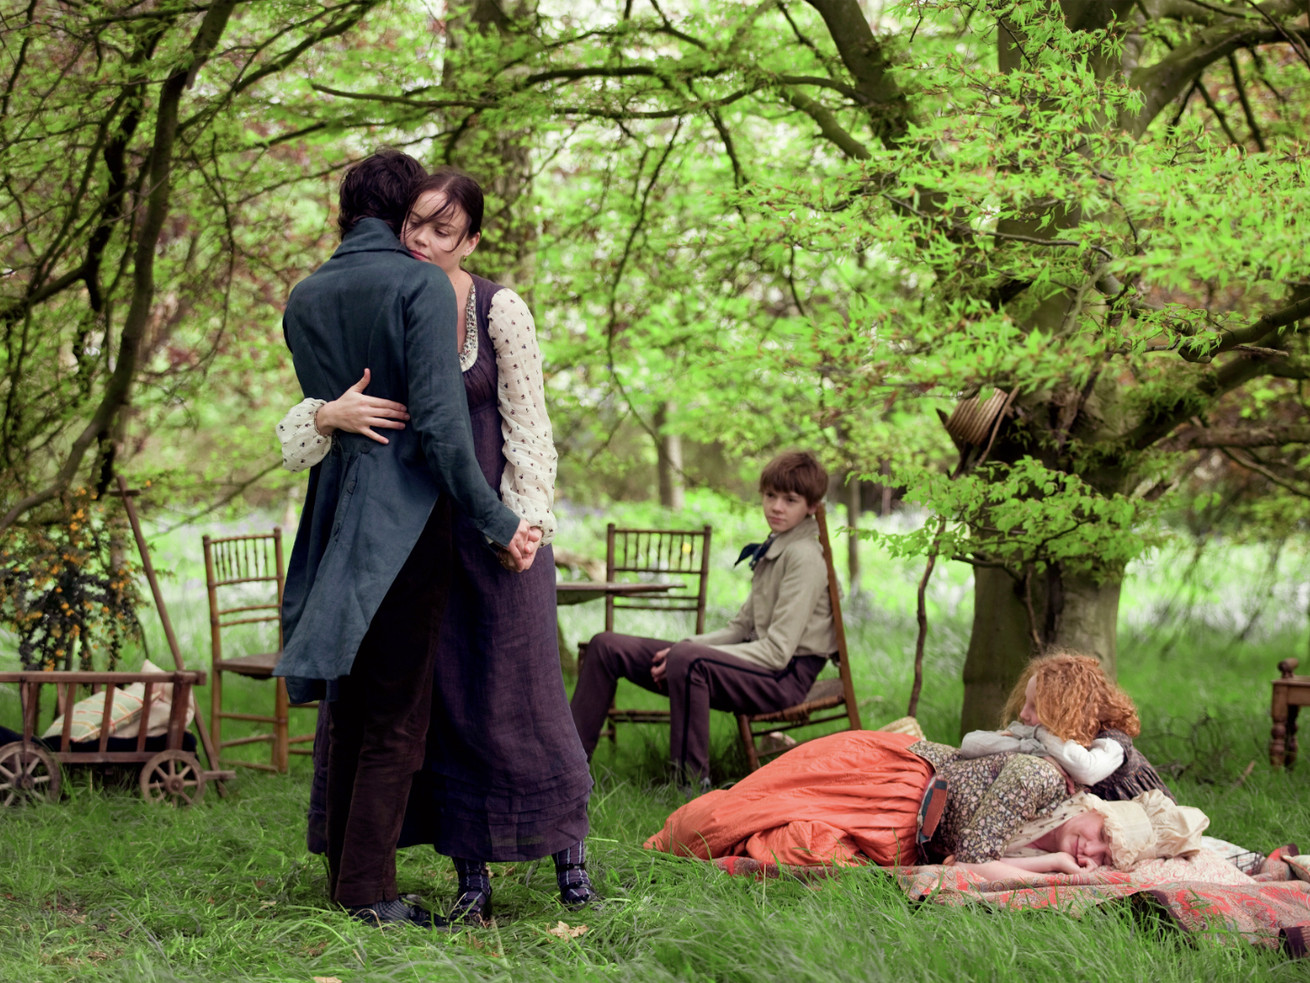 One Good Thing: The Jane Campion film that captures spring euphoria